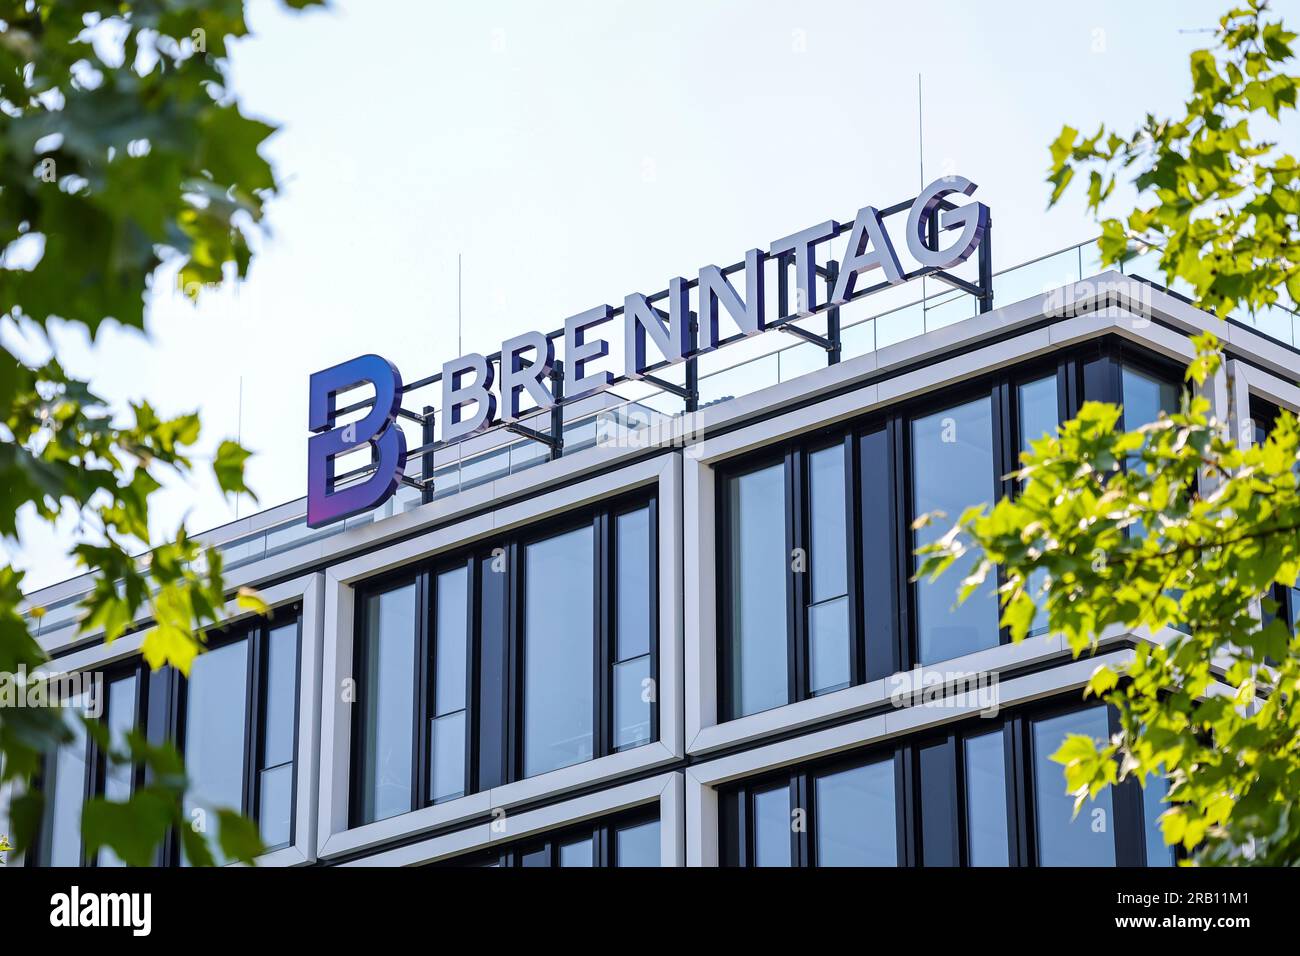 Essen, North Rhine-Westphalia, Germany - Brenntag, company logo on the facade of the Brenntag headquarters, The company is the world market leader in the distribution of chemicals and ingredients Stock Photo